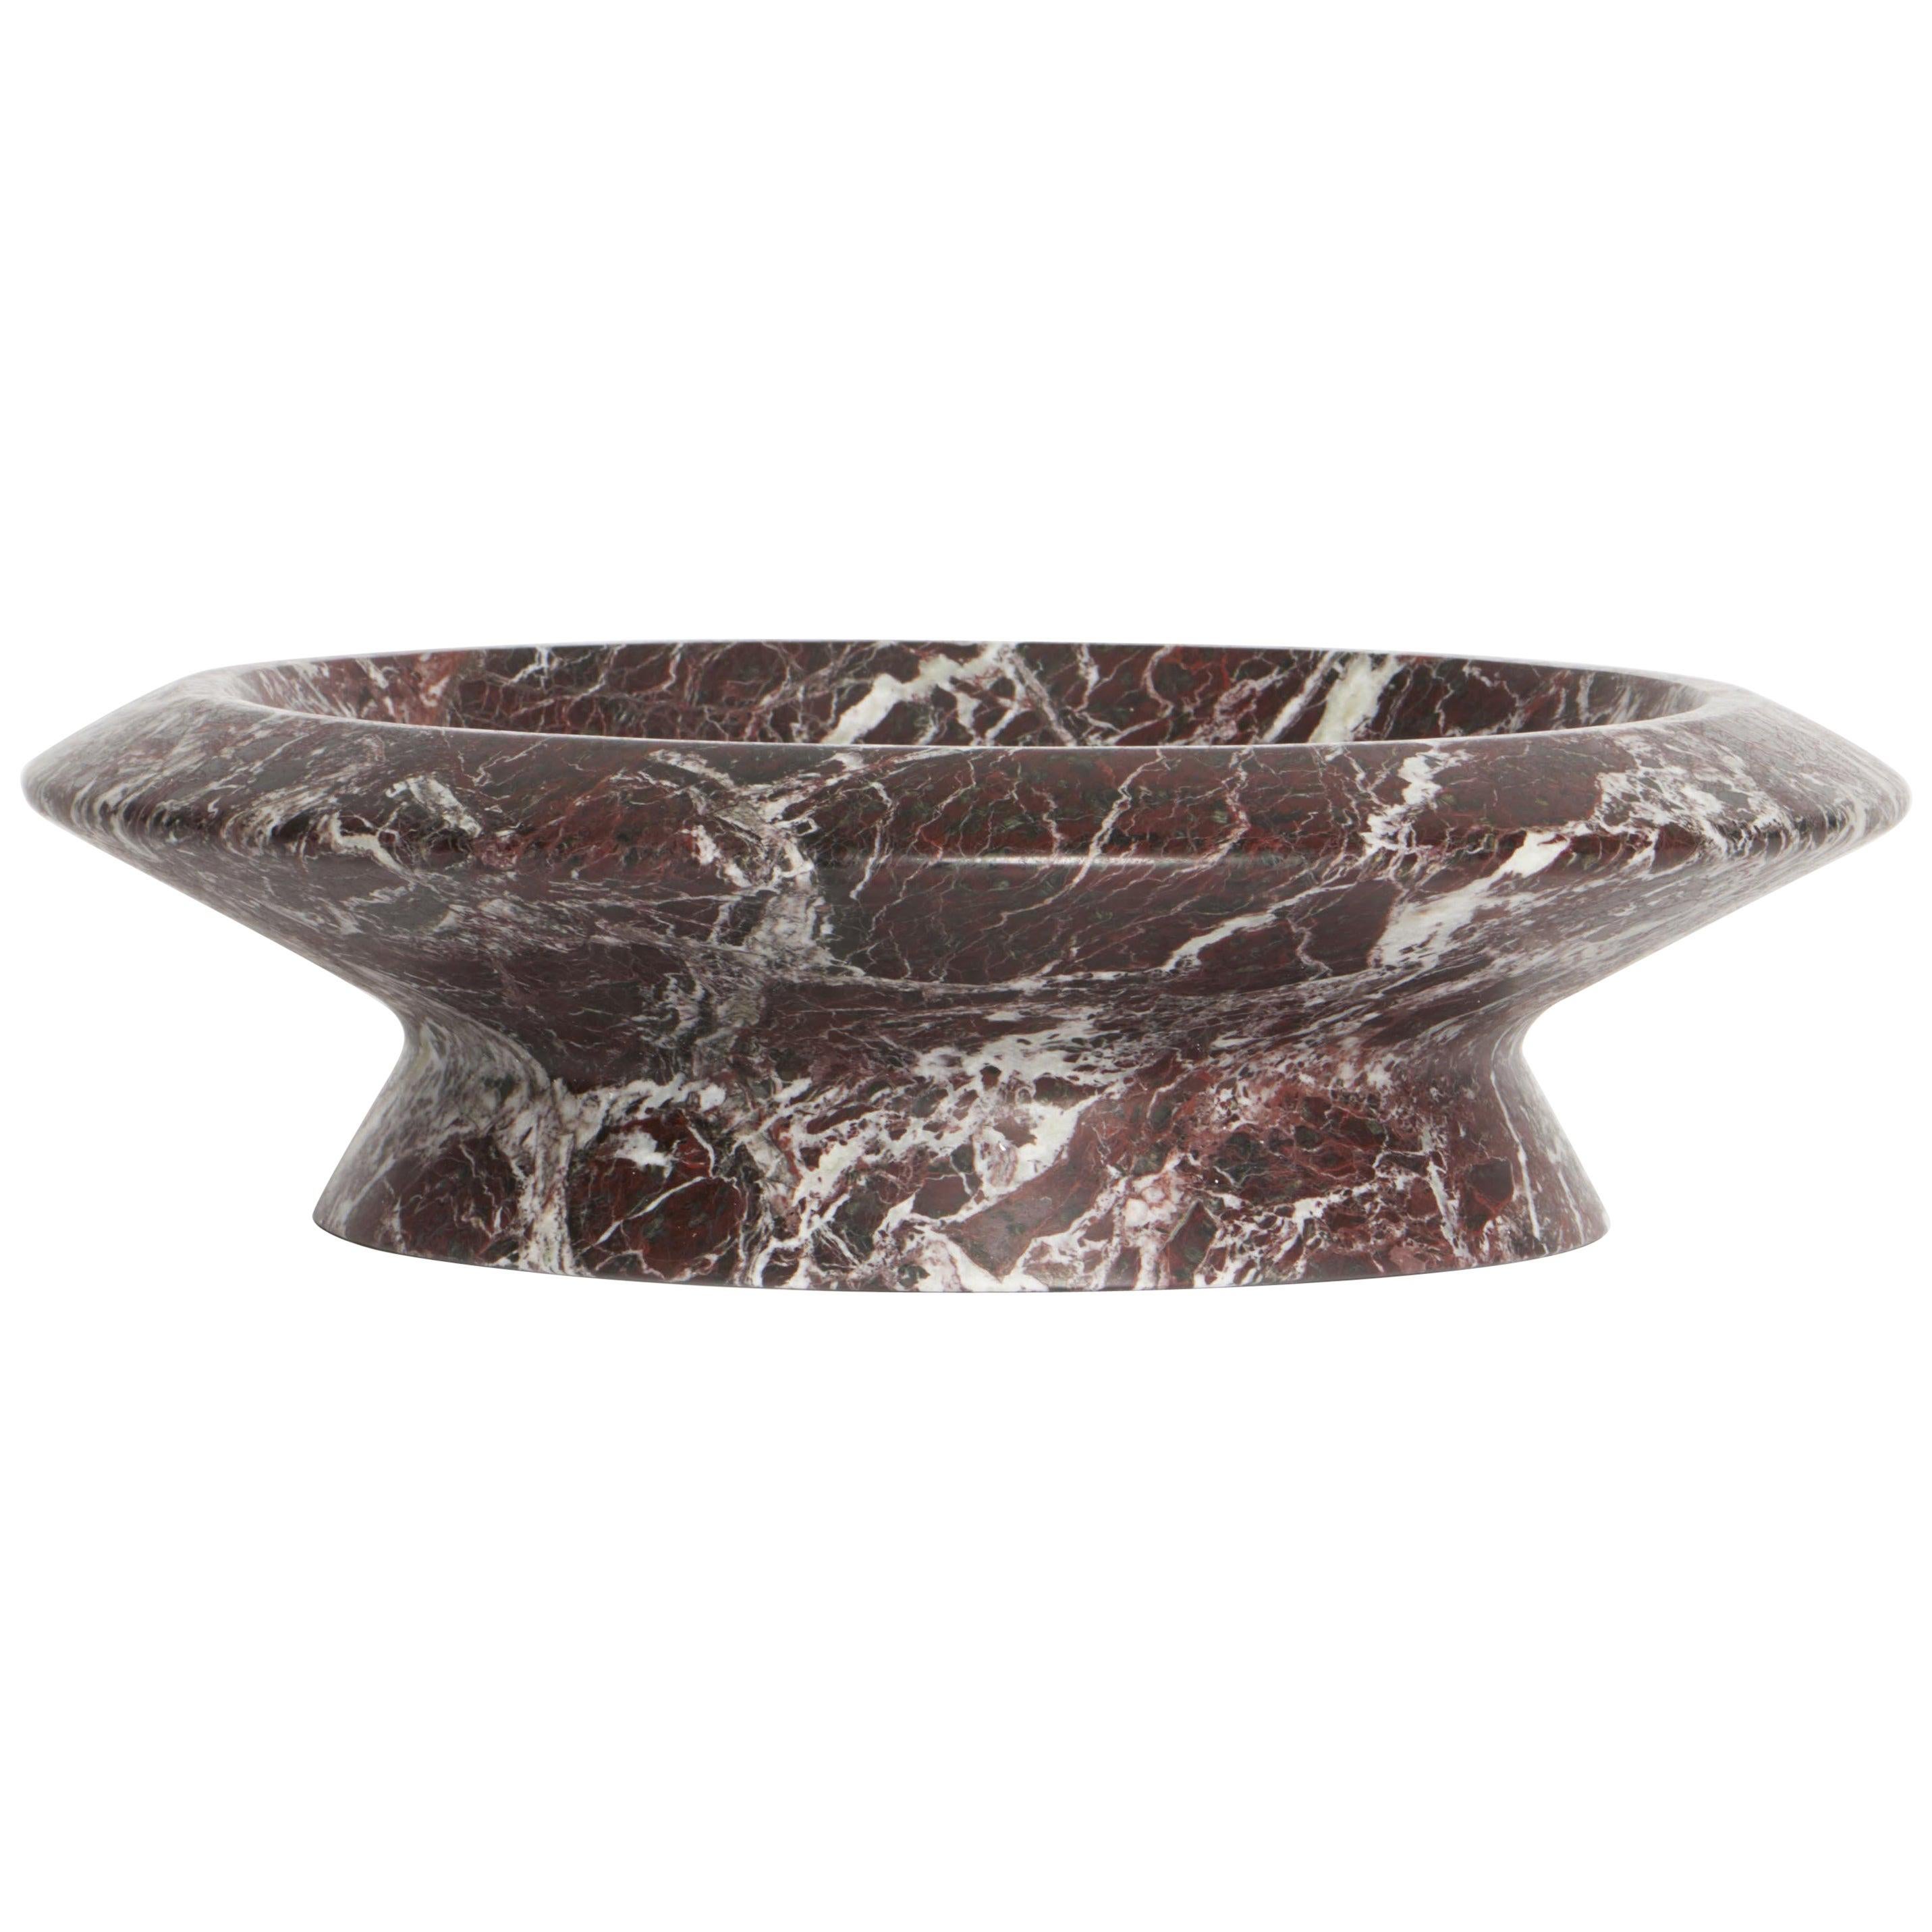 New modern Centerpiece in Red Levanto Marble creator Ivan Colominas STOCK